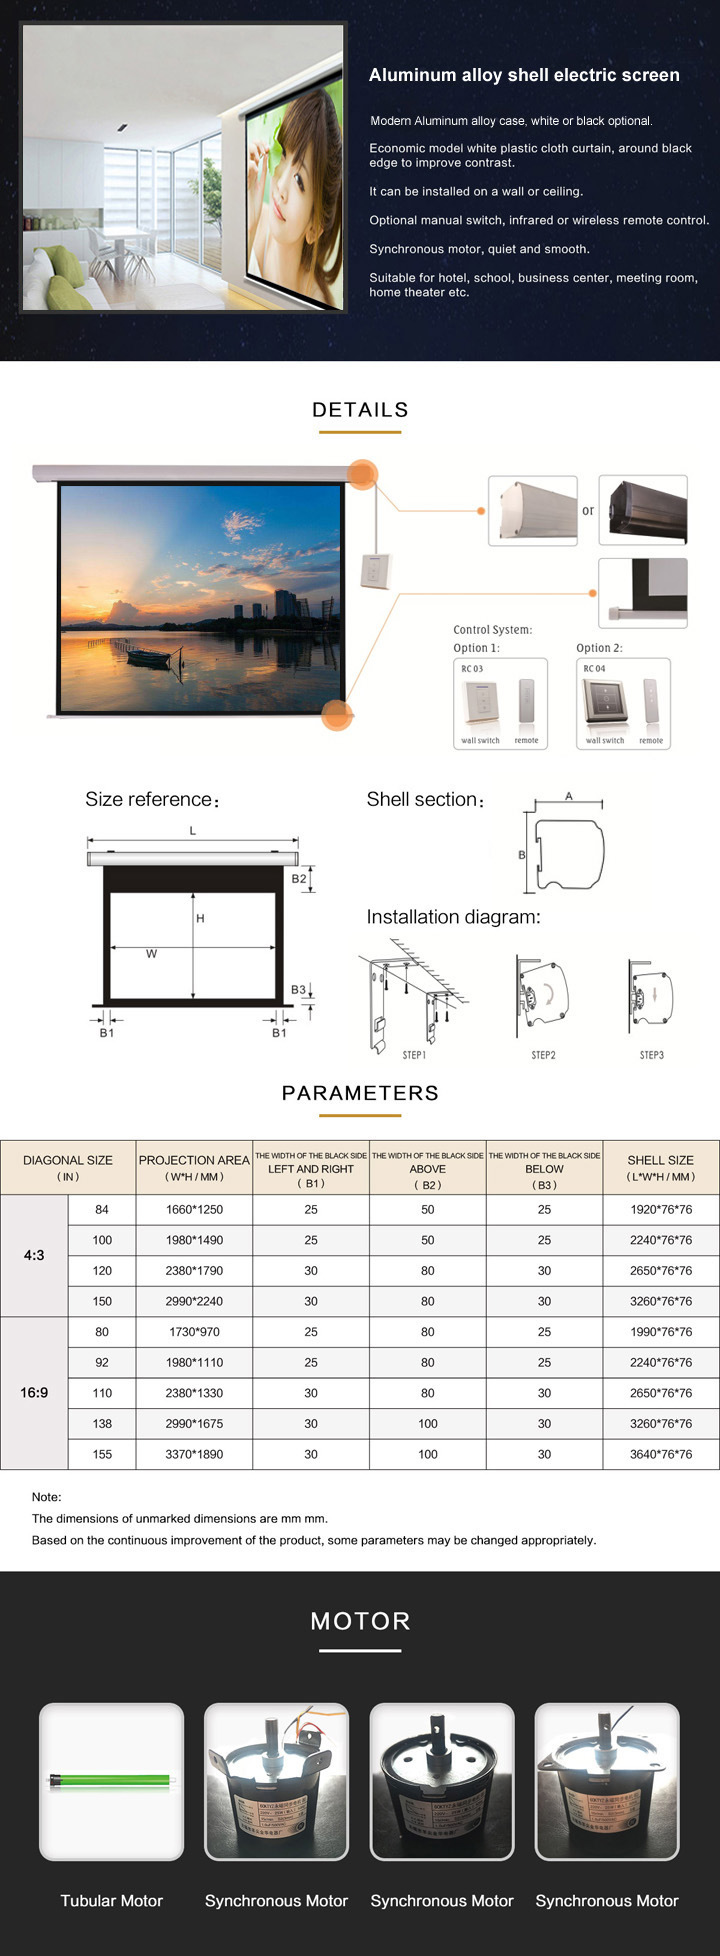 High Gain Electric 200 Inch Motorized 16: 9 Projector Screen